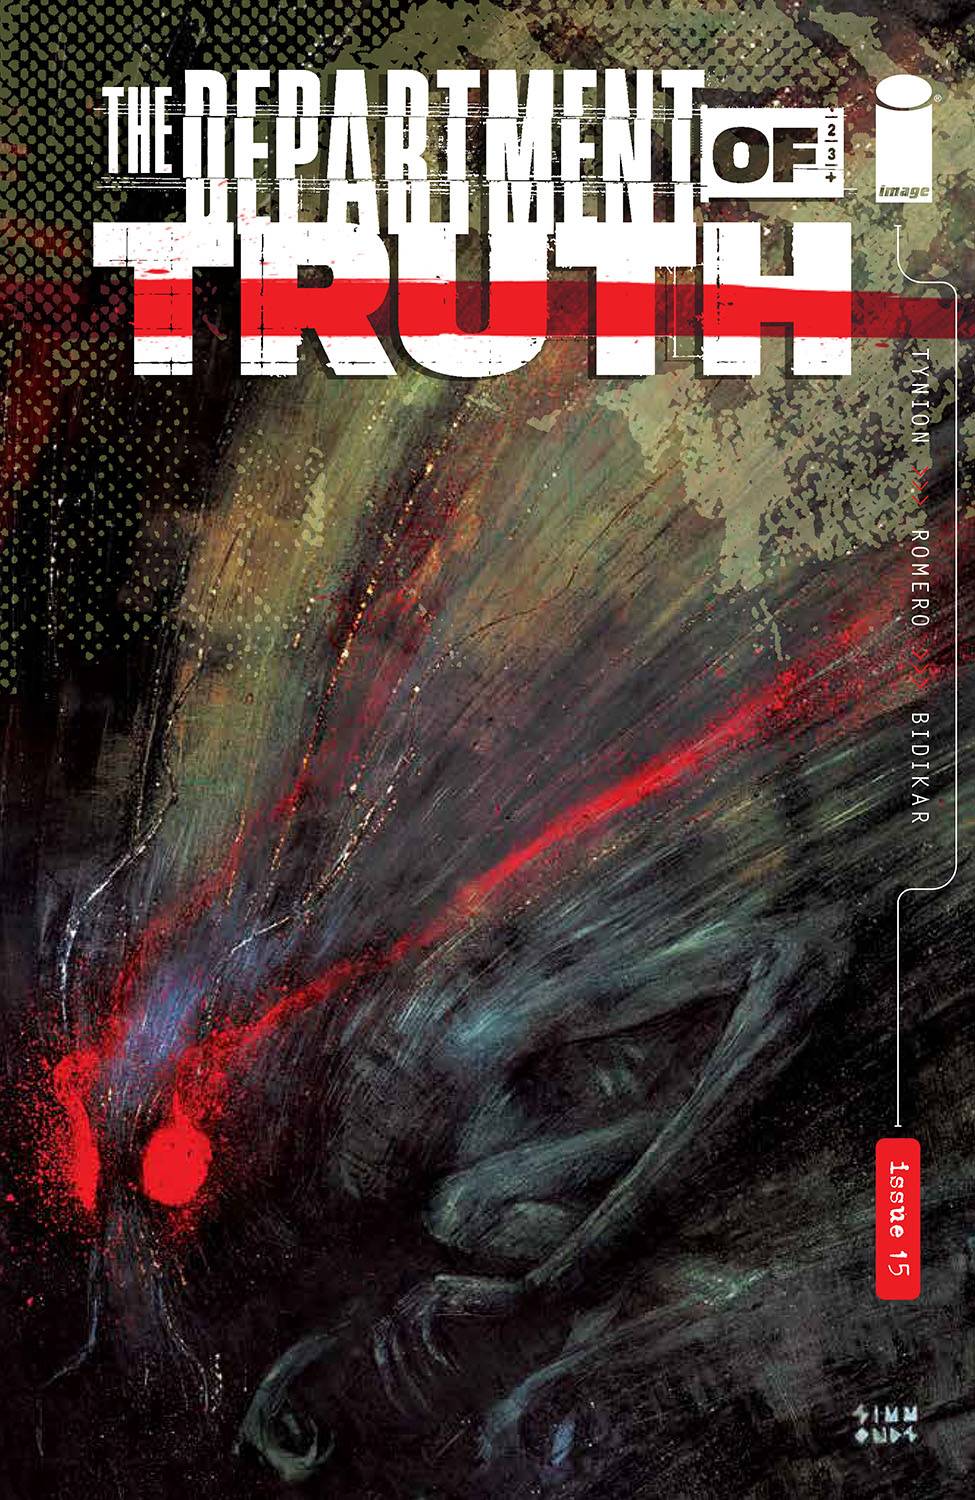 DEPARTMENT OF TRUTH #15